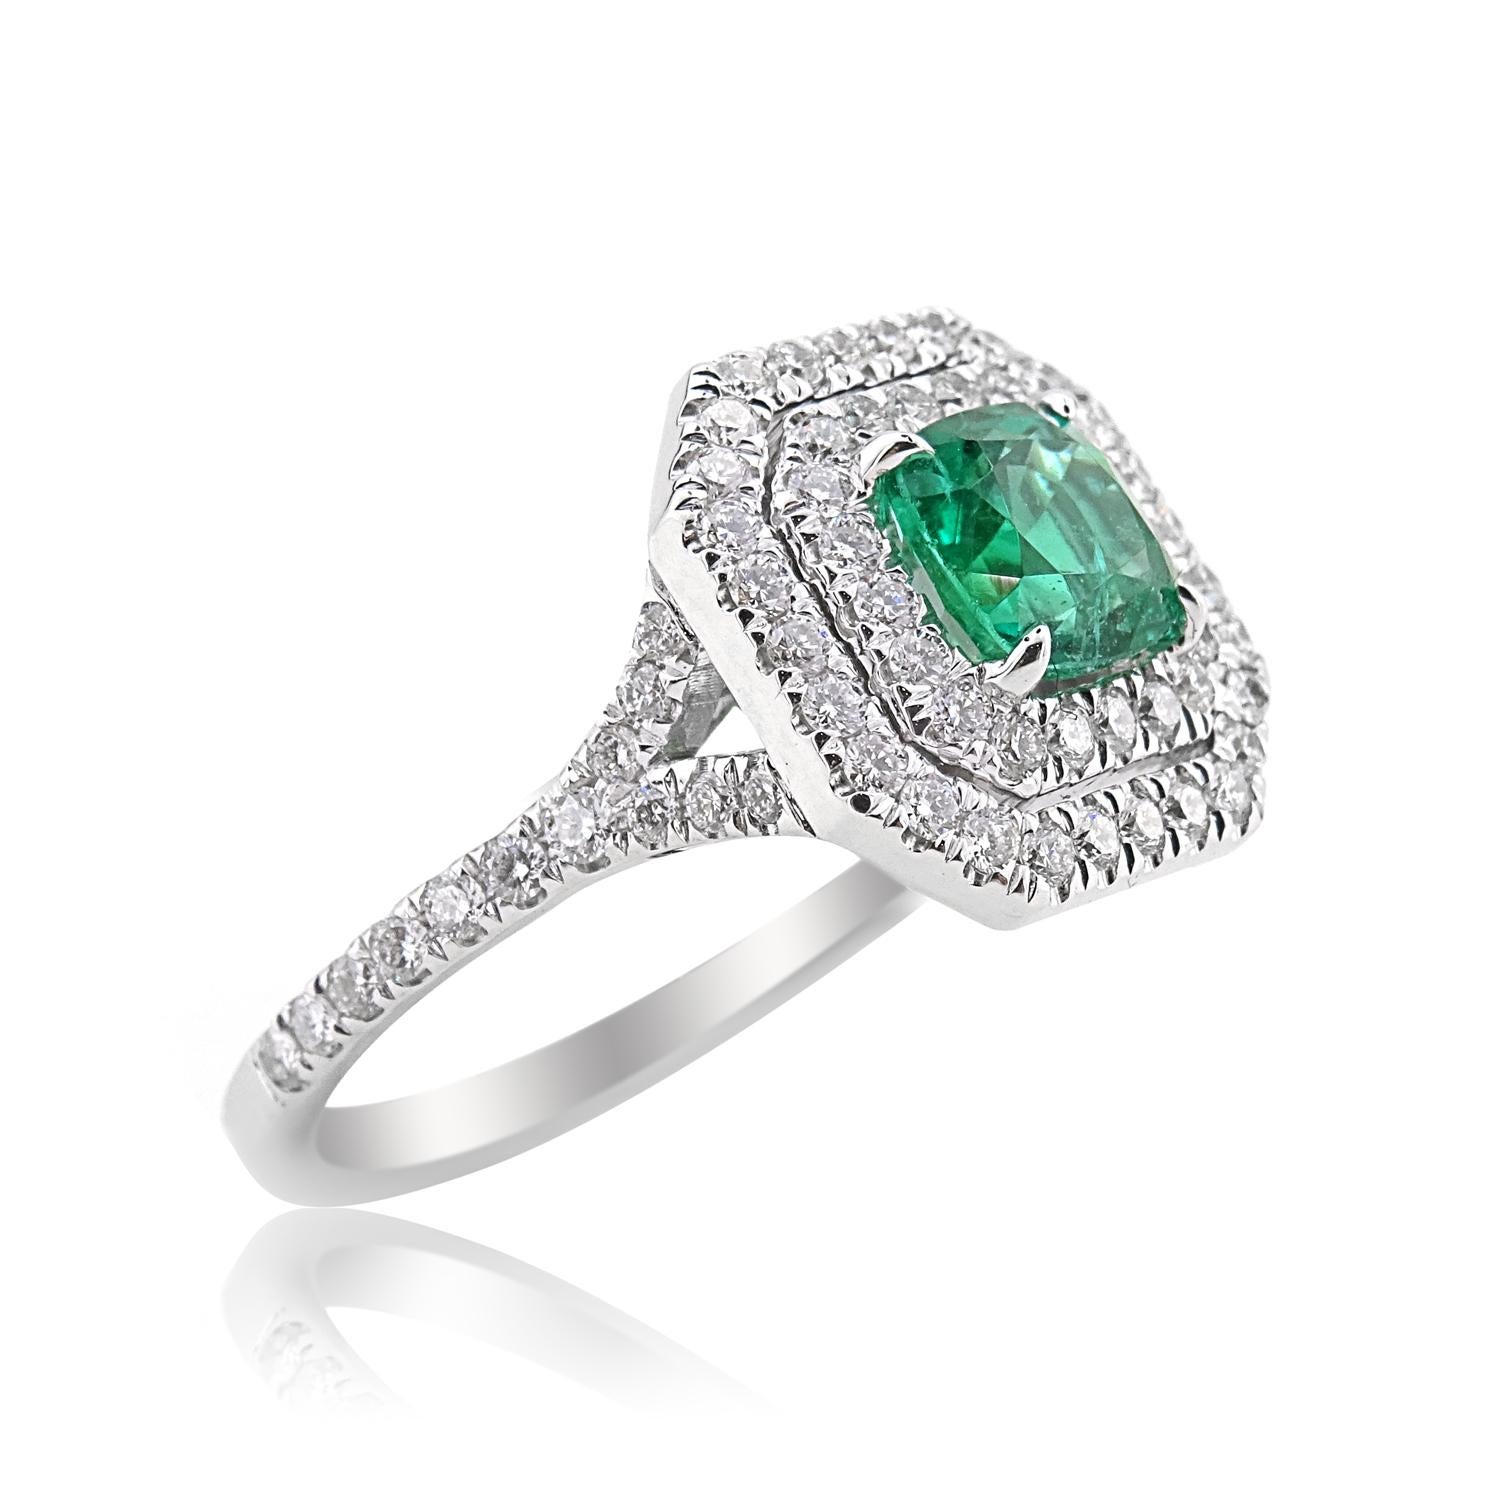 ZAMBIAN EMERALD AND DIAMOND RING - 1.60 CT


Set in 18KT White gold


Total emerald weight: 1.00 ct
[ 1 stone ]
Color: Green
Origin: Zambia

Total diamond weight: 0.60 ct
Color: G-H
Clarity: VS

Total ring weight: 5.51 grams